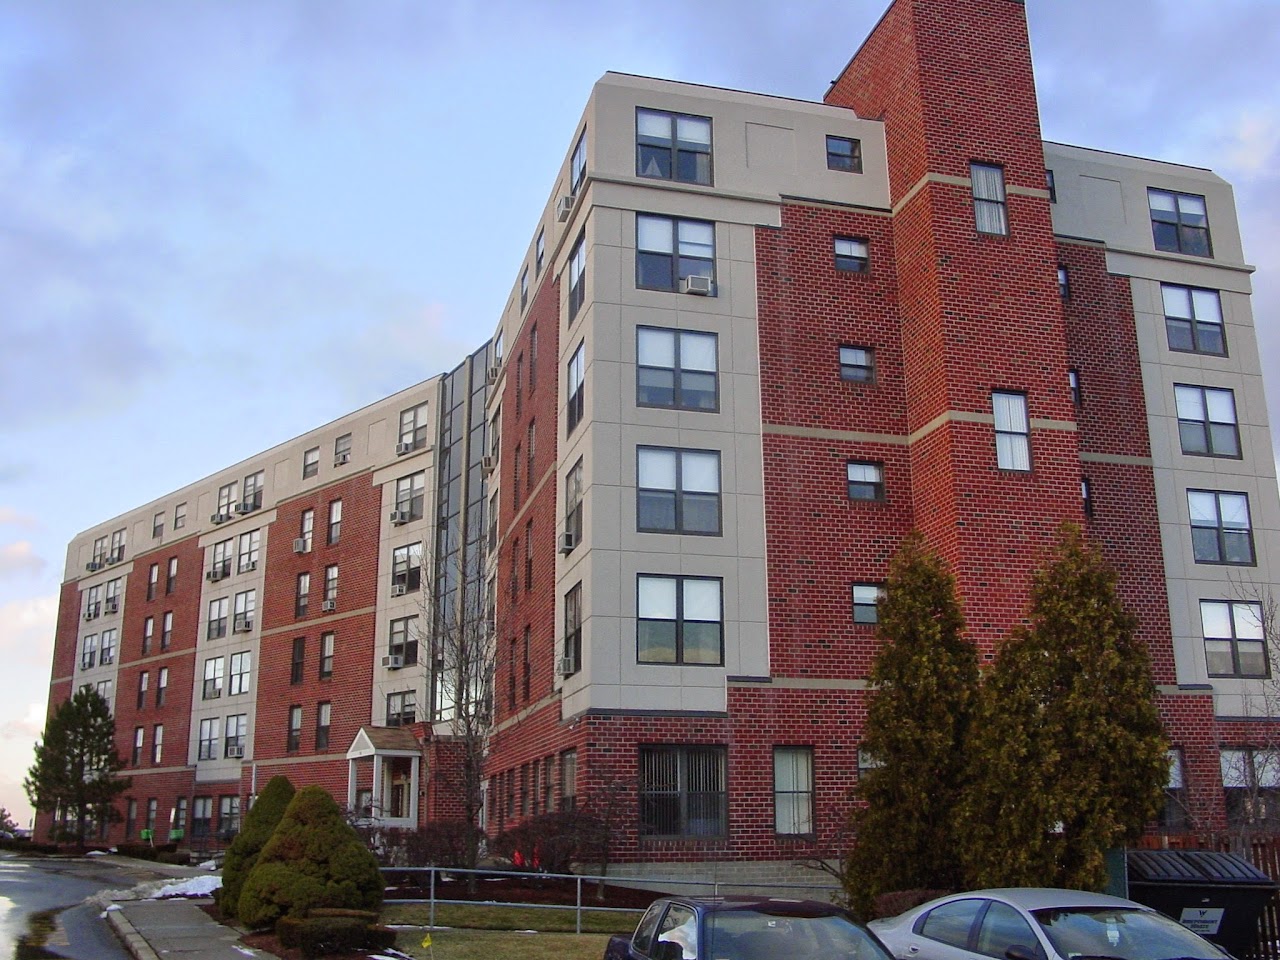 Photo of ADMIRAL HILL ASSISTED LIVING I. Affordable housing located at 201 CAPTAINS ROW CHELSEA, MA 02150